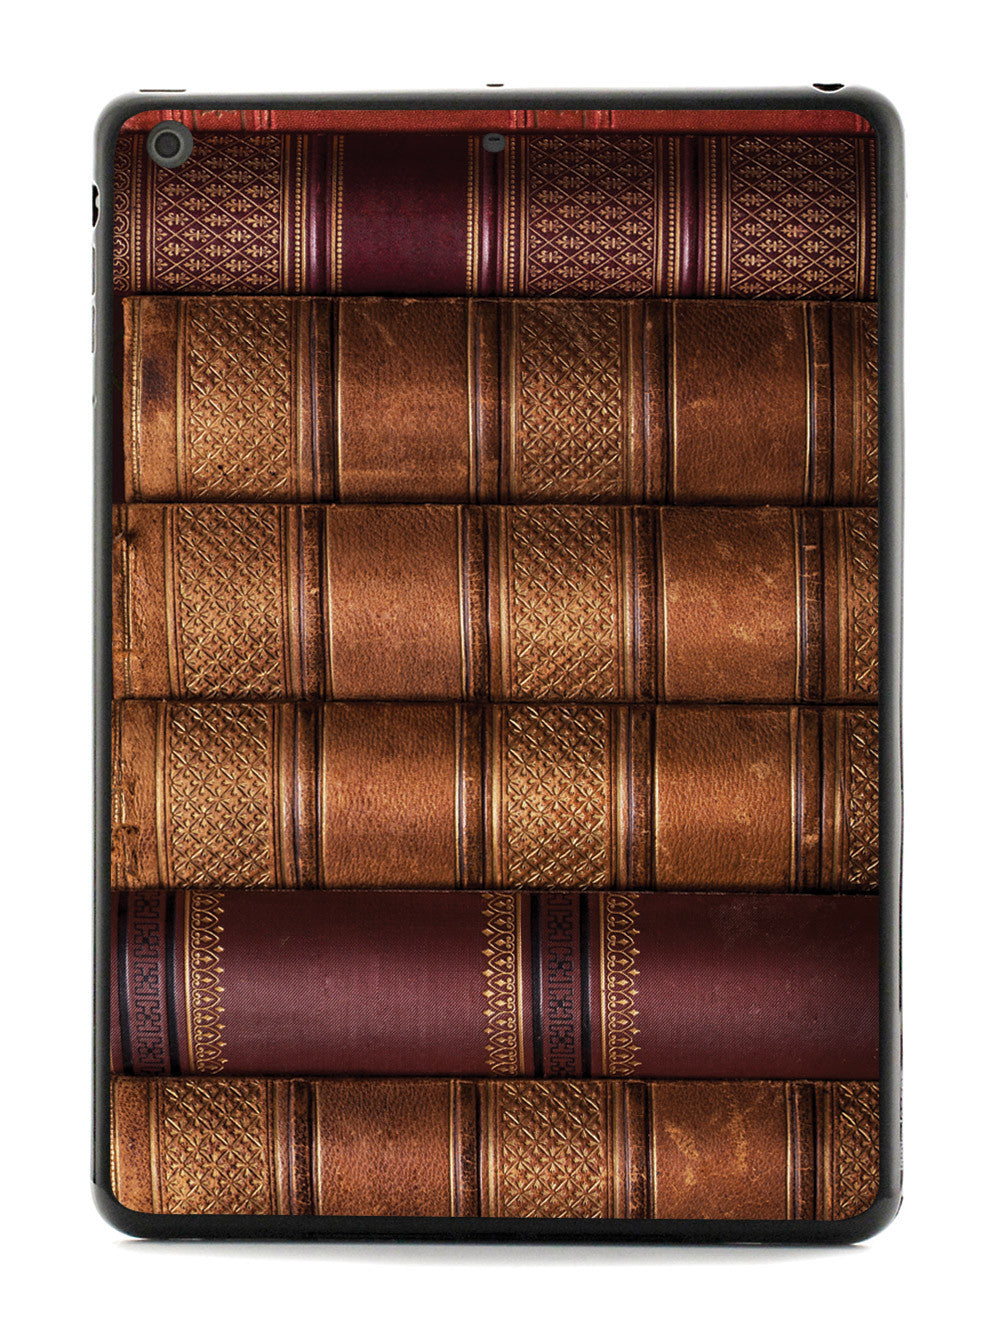 Ancient Book Spines - Black Case